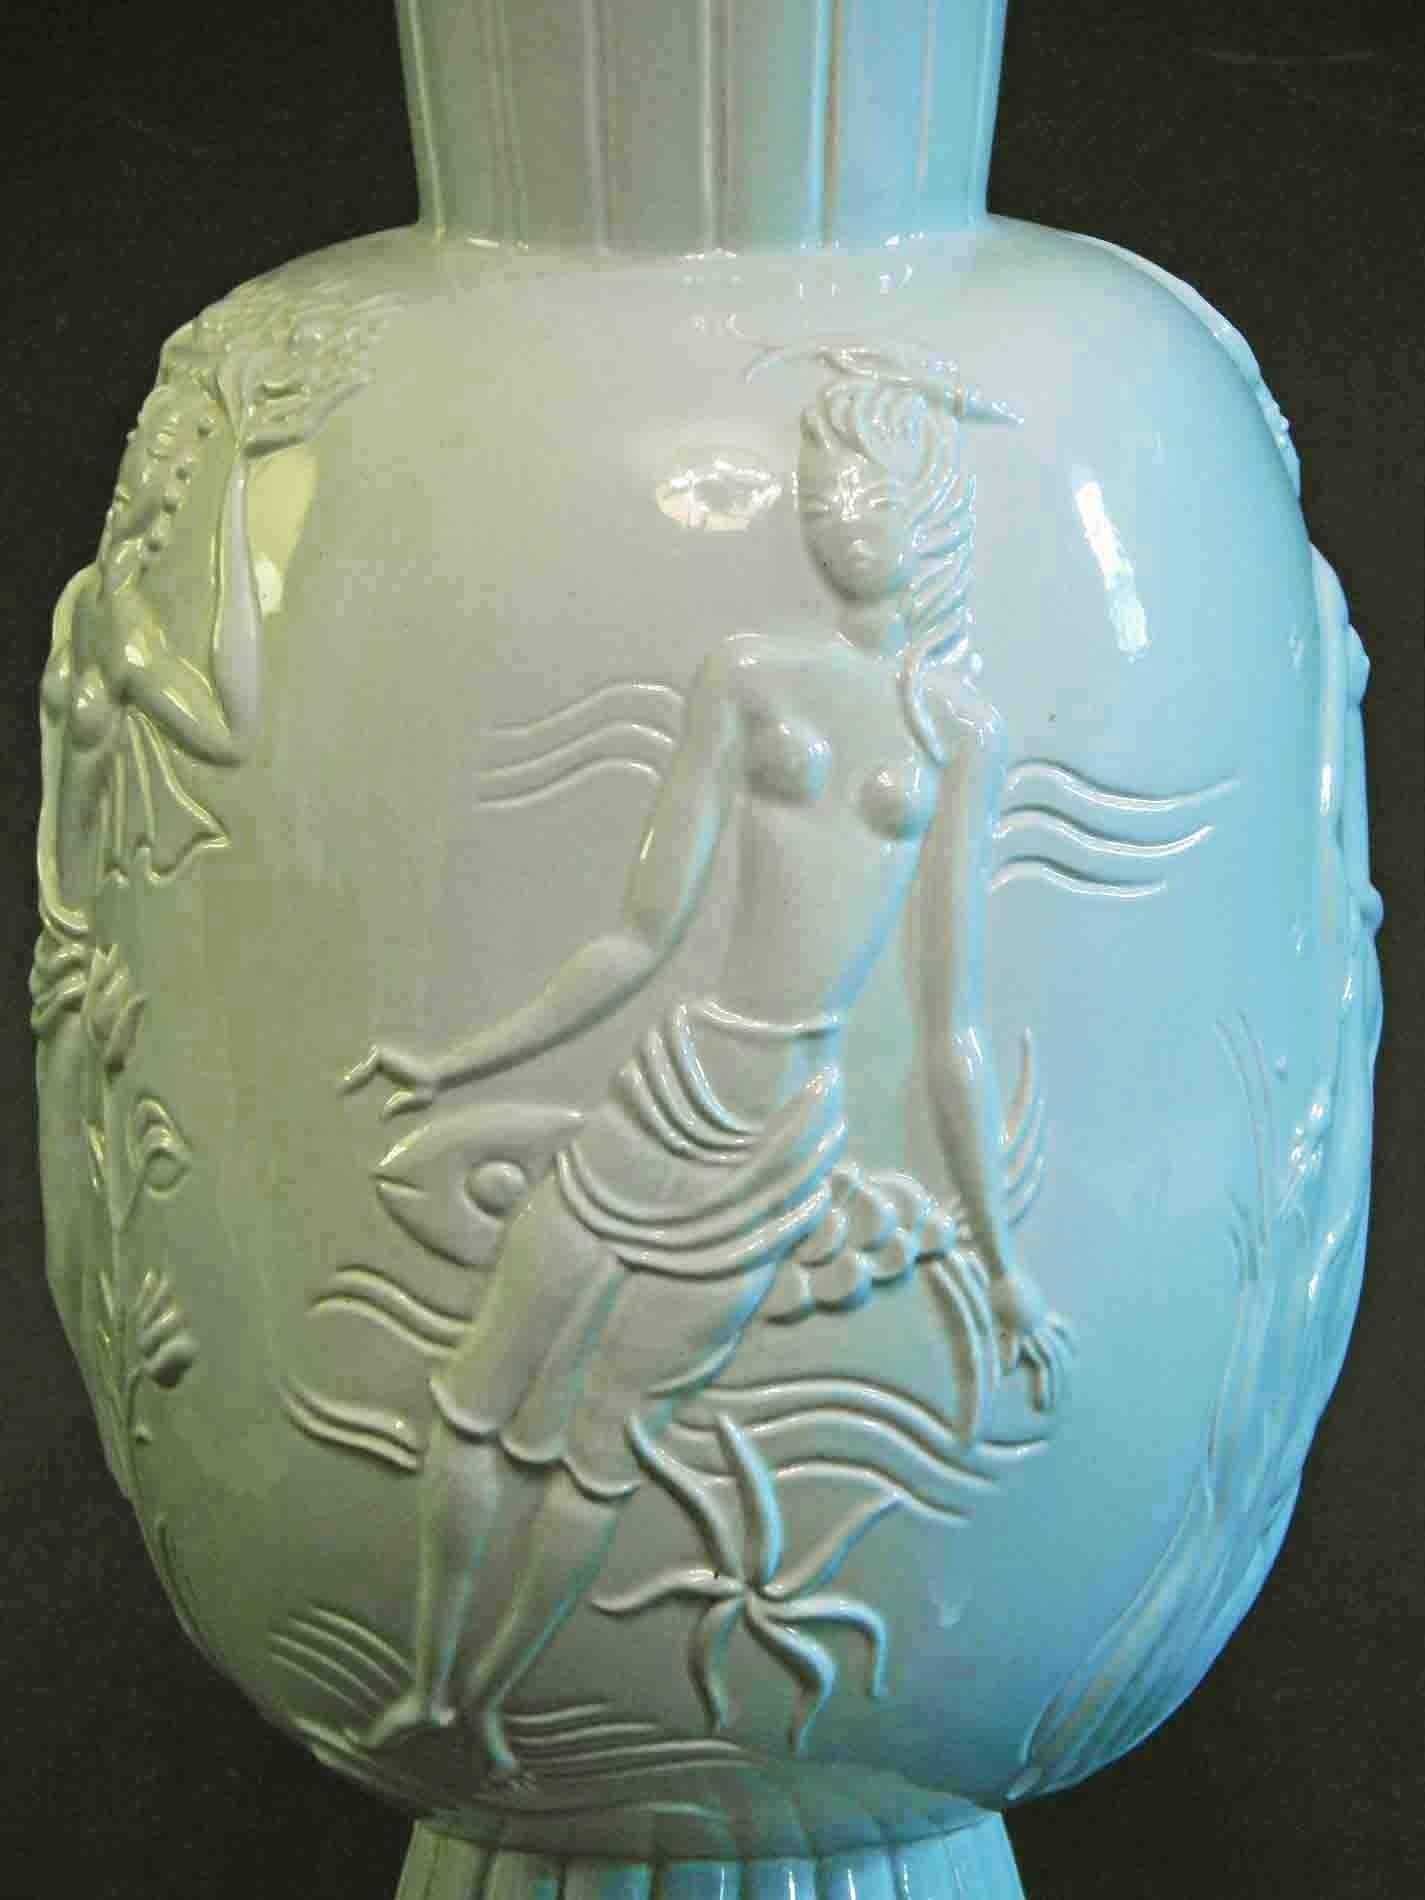 Perhaps Vally Wieselthier's greatest masterpiece after emigrating From Vienna to New York in the early 1930s, this unique vase depicts -- in dramatic bas relief -- the Four Elements: Earth, Water, Fire and Air. Each of the Elements is depicted as a